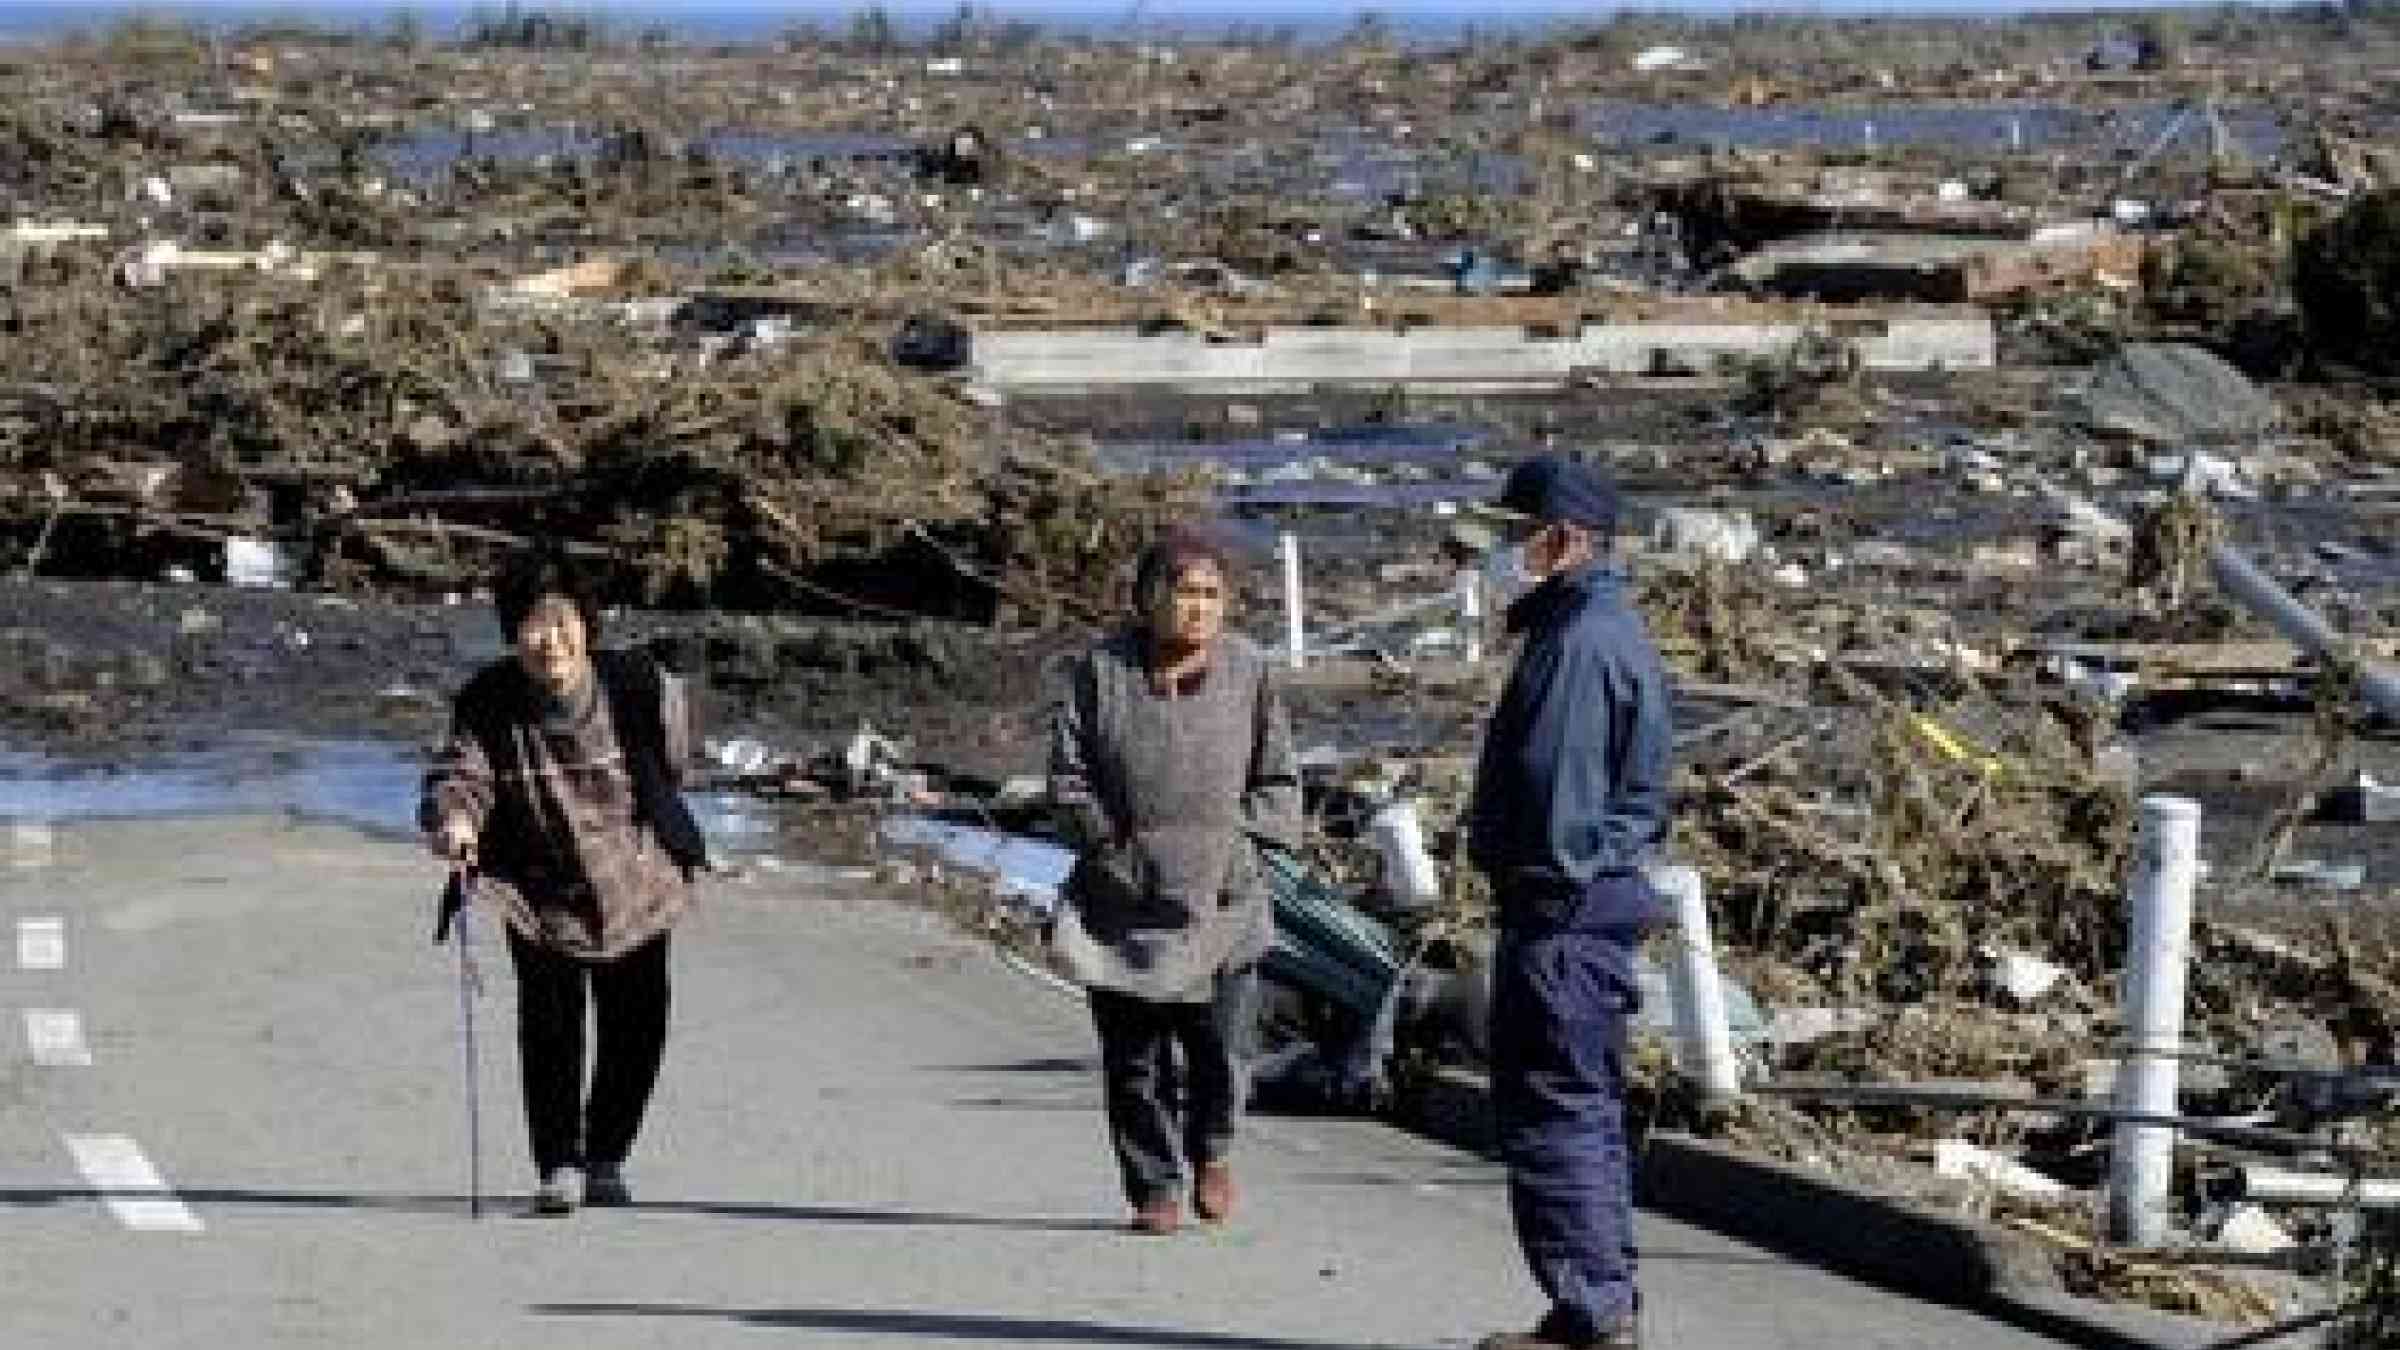 Elderly people look at the extensive damages from the tsunami in Minamisoma, Fukushima Prefecture on March 12, 2011 (Photo: TORU YAMANAKA/AFP/Getty Images)